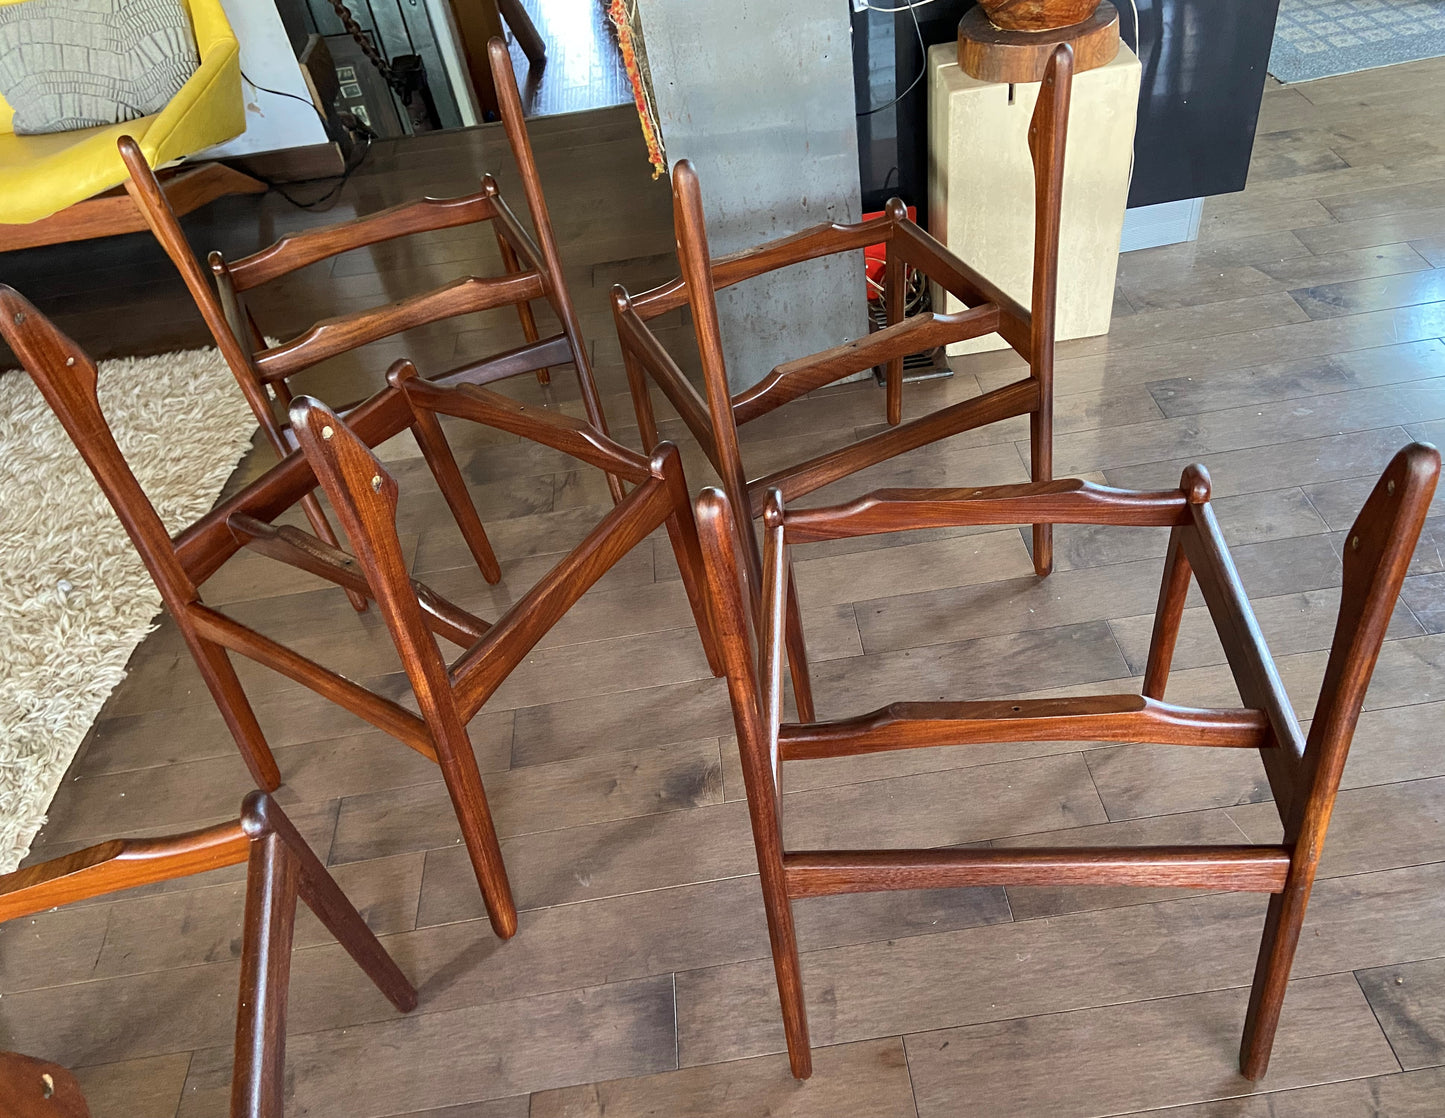 6 REFINISHED will be REUPHOLSTERED Danish Mid Century Modern E. Buch Teak Chairs, floating seats